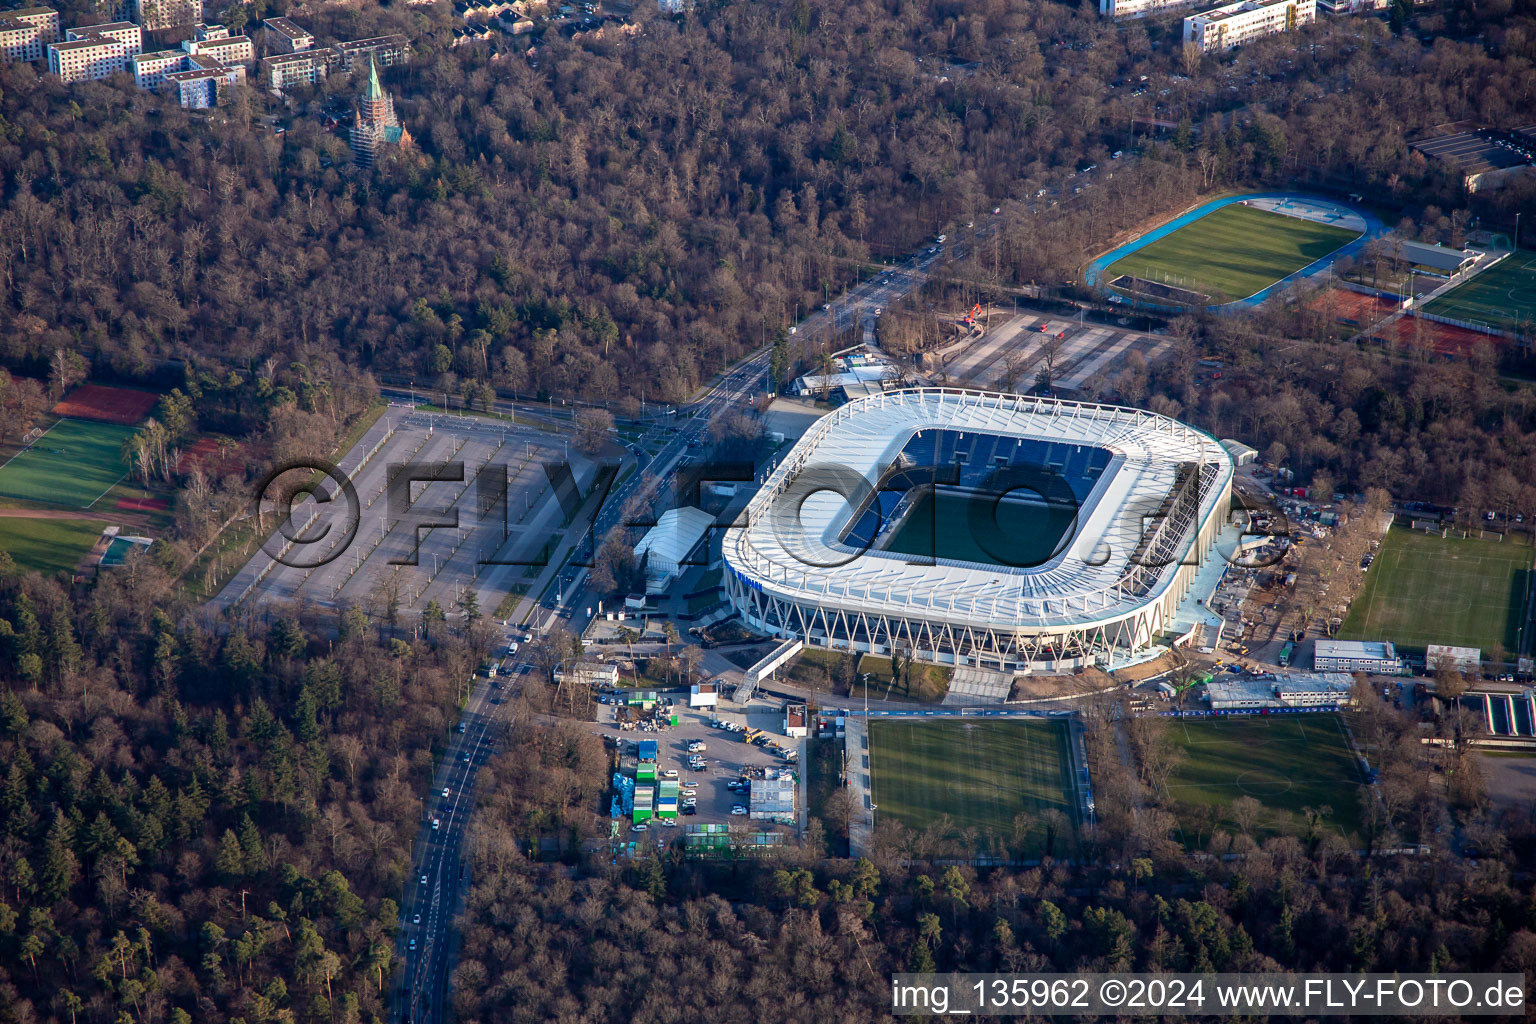 BBBank Wildpark, KSC's almost completed new stadium in the district Innenstadt-Ost in Karlsruhe in the state Baden-Wuerttemberg, Germany